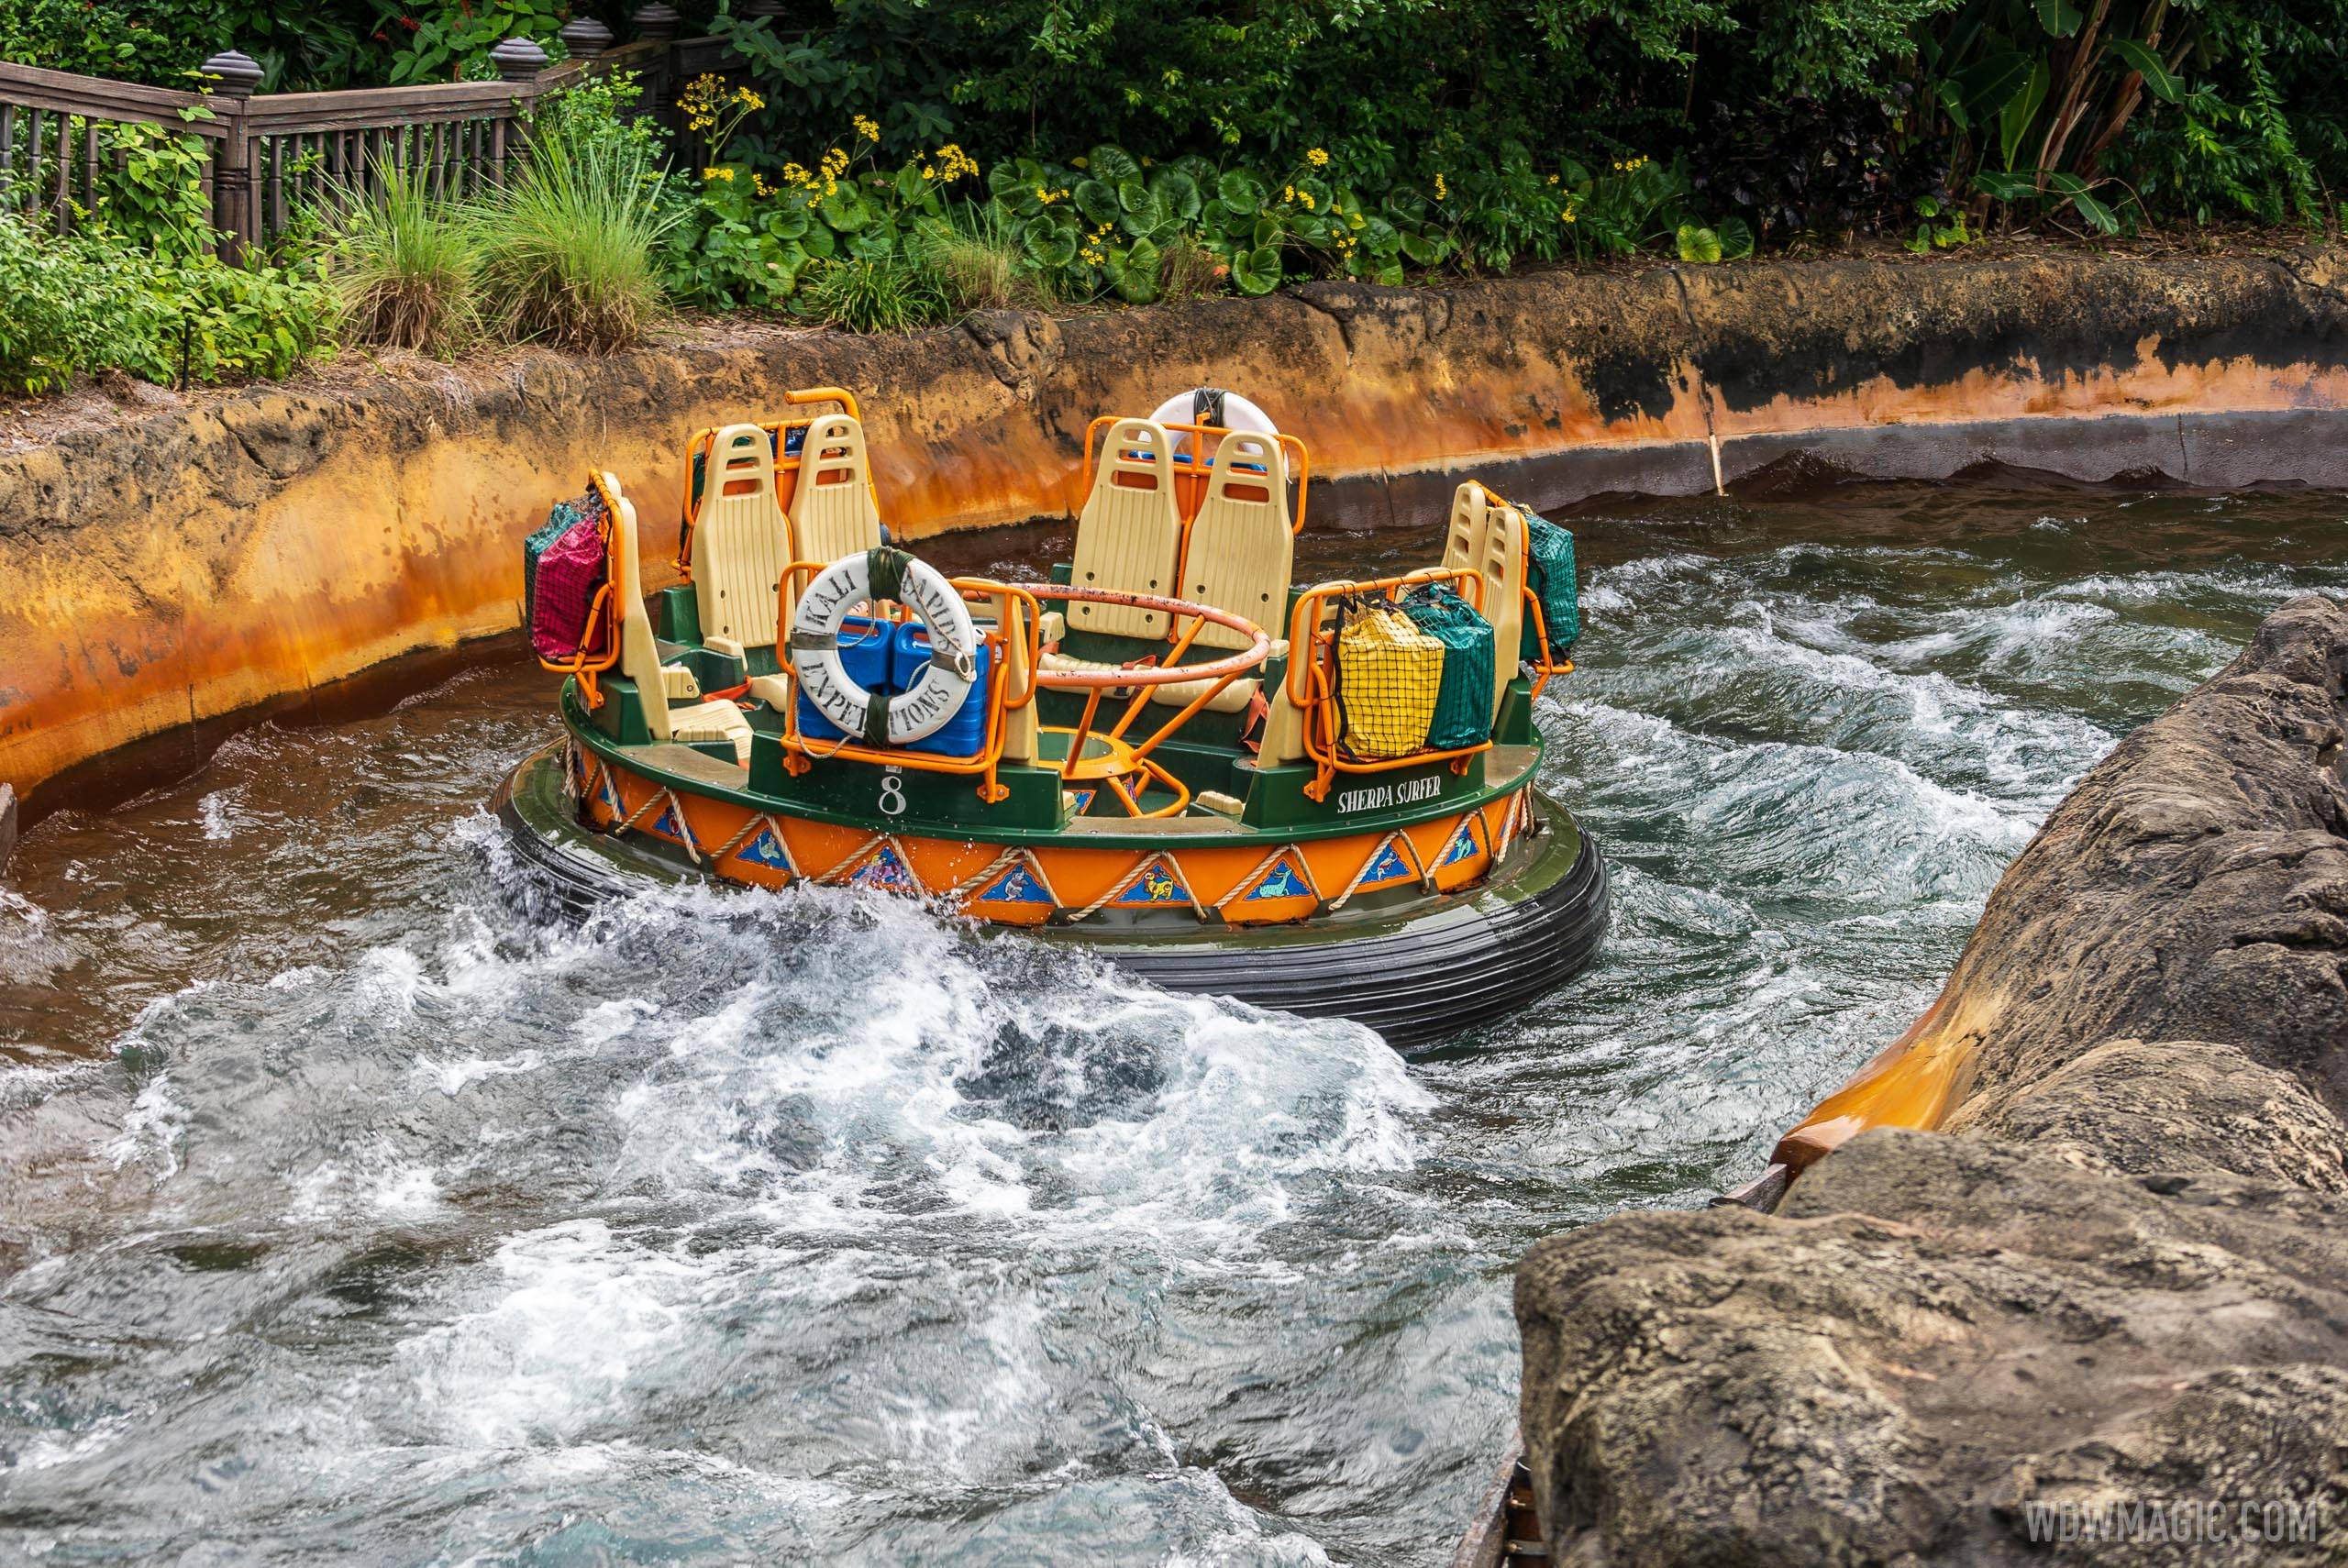 Kali River Rapids closing for 3 month refurbishment in early 2021